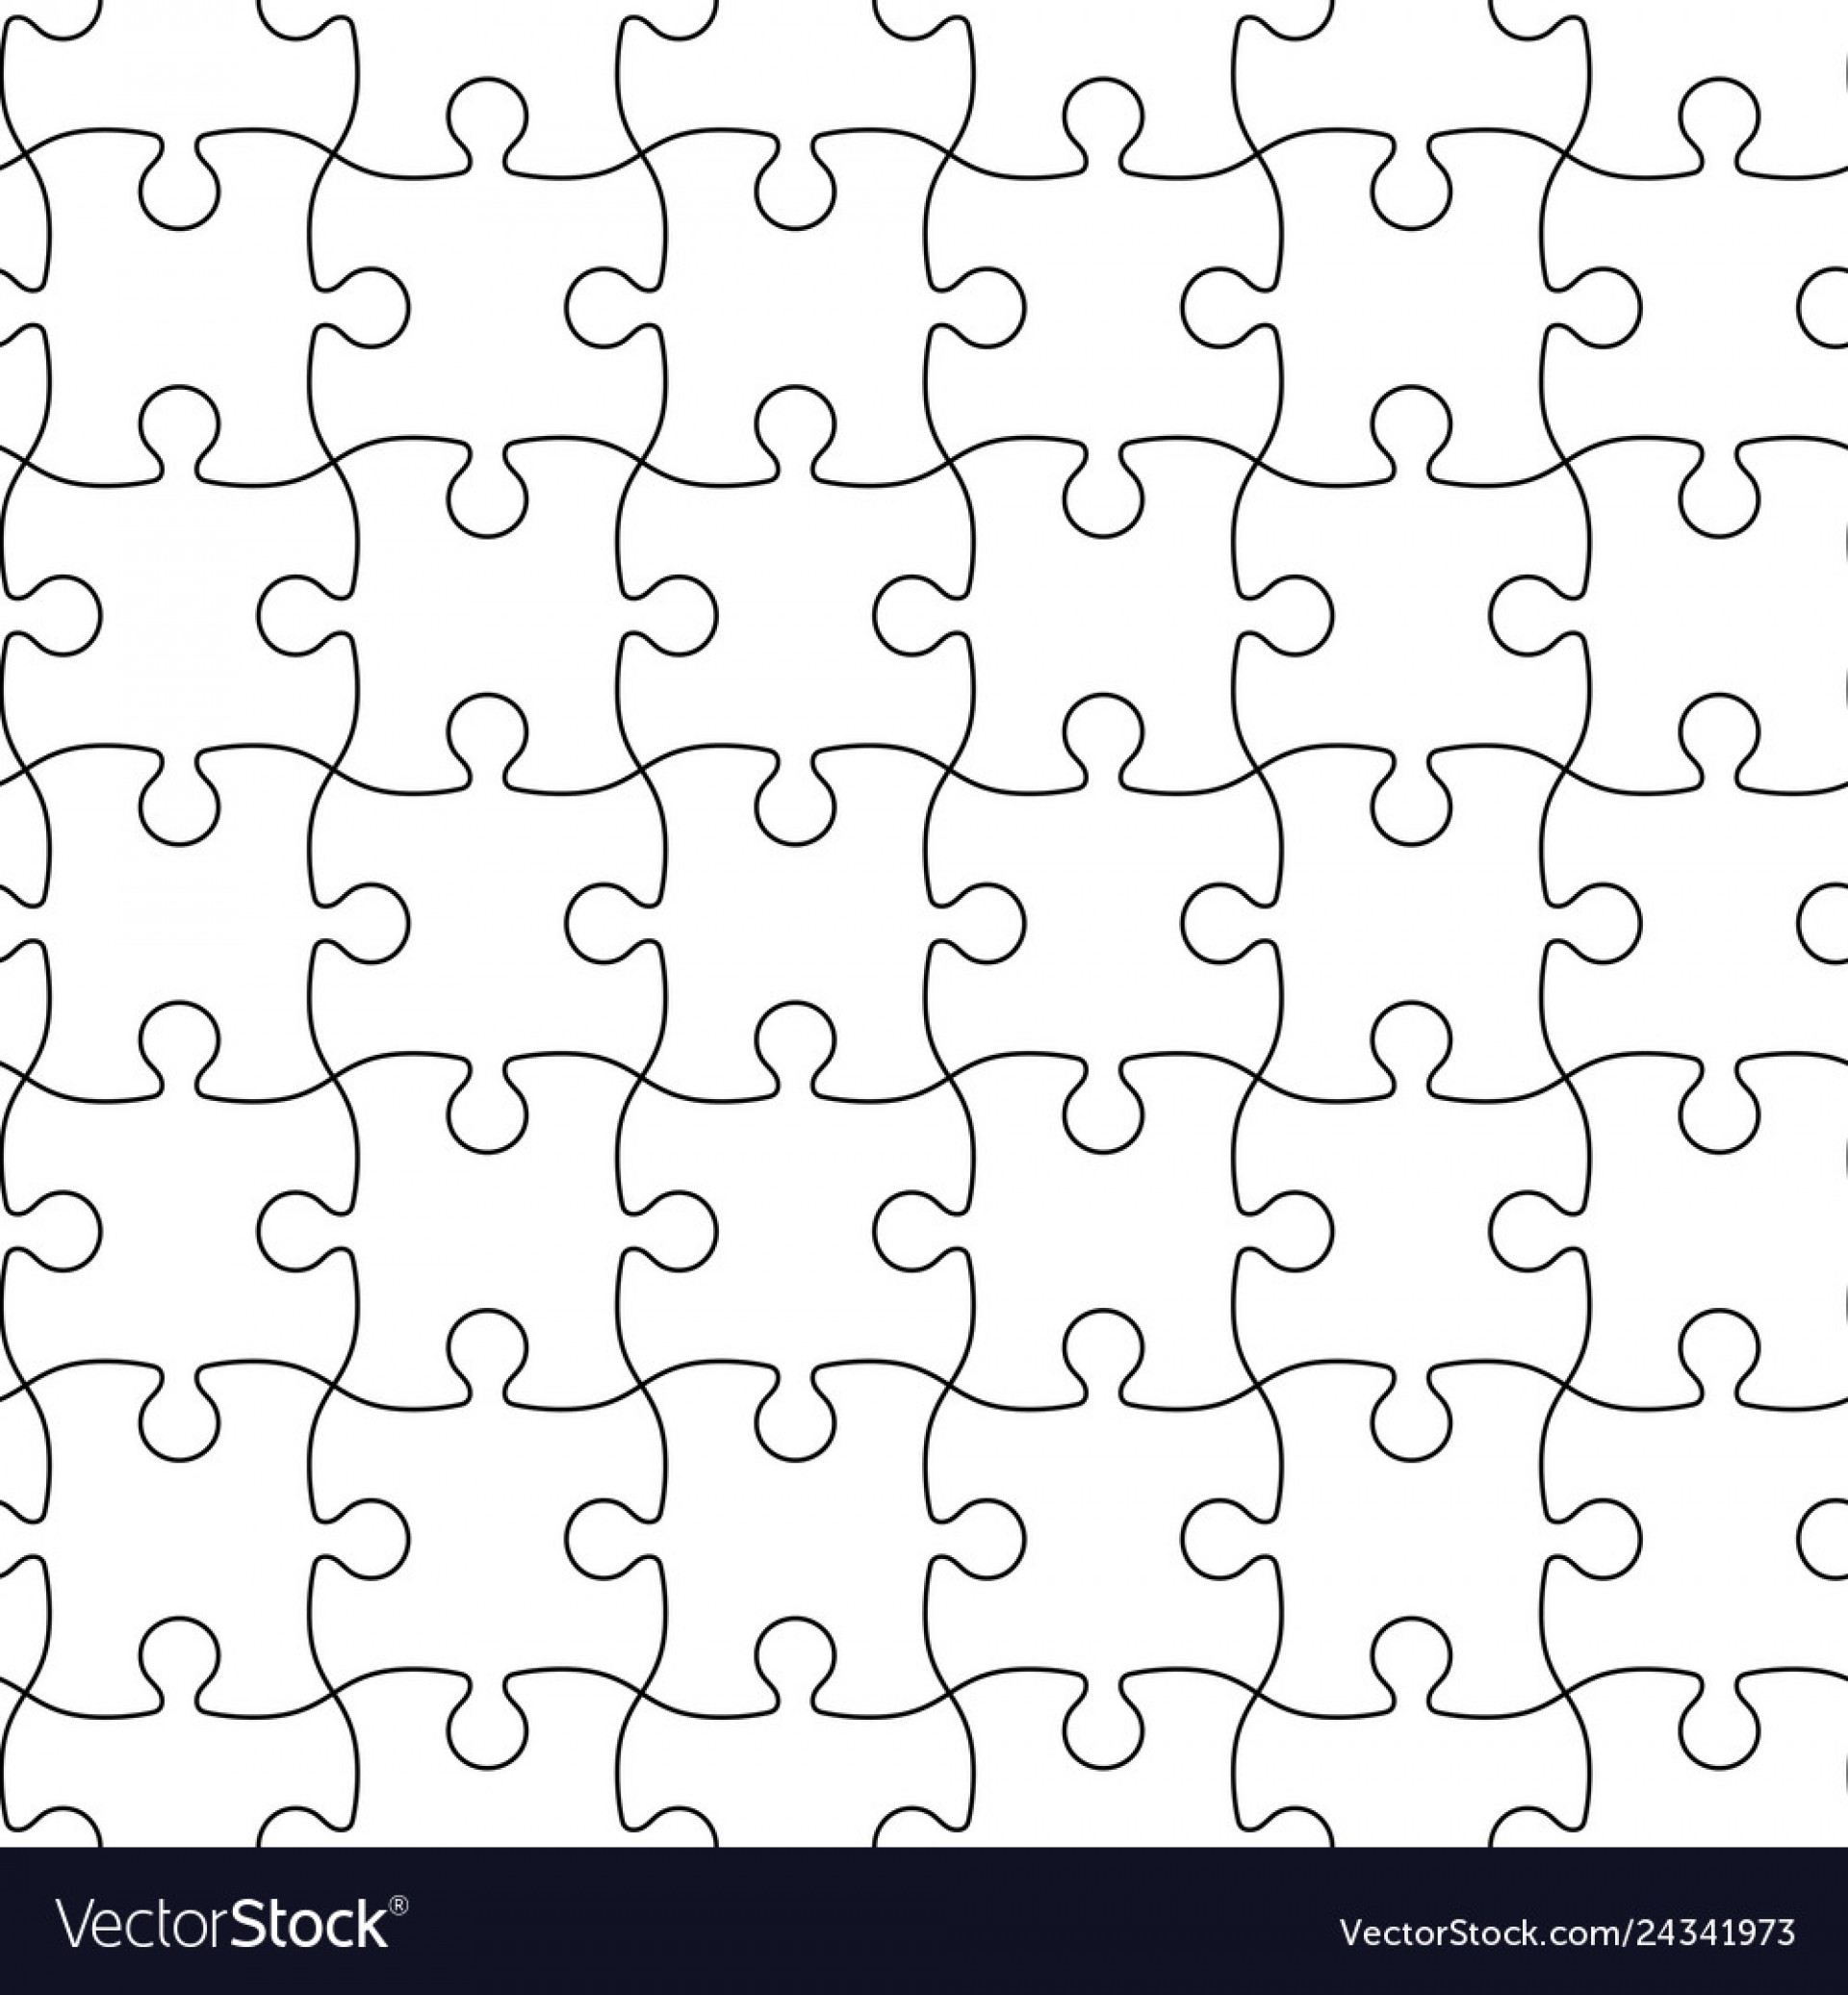 Jigsaw Puzzle Vector Generator At Collection Of